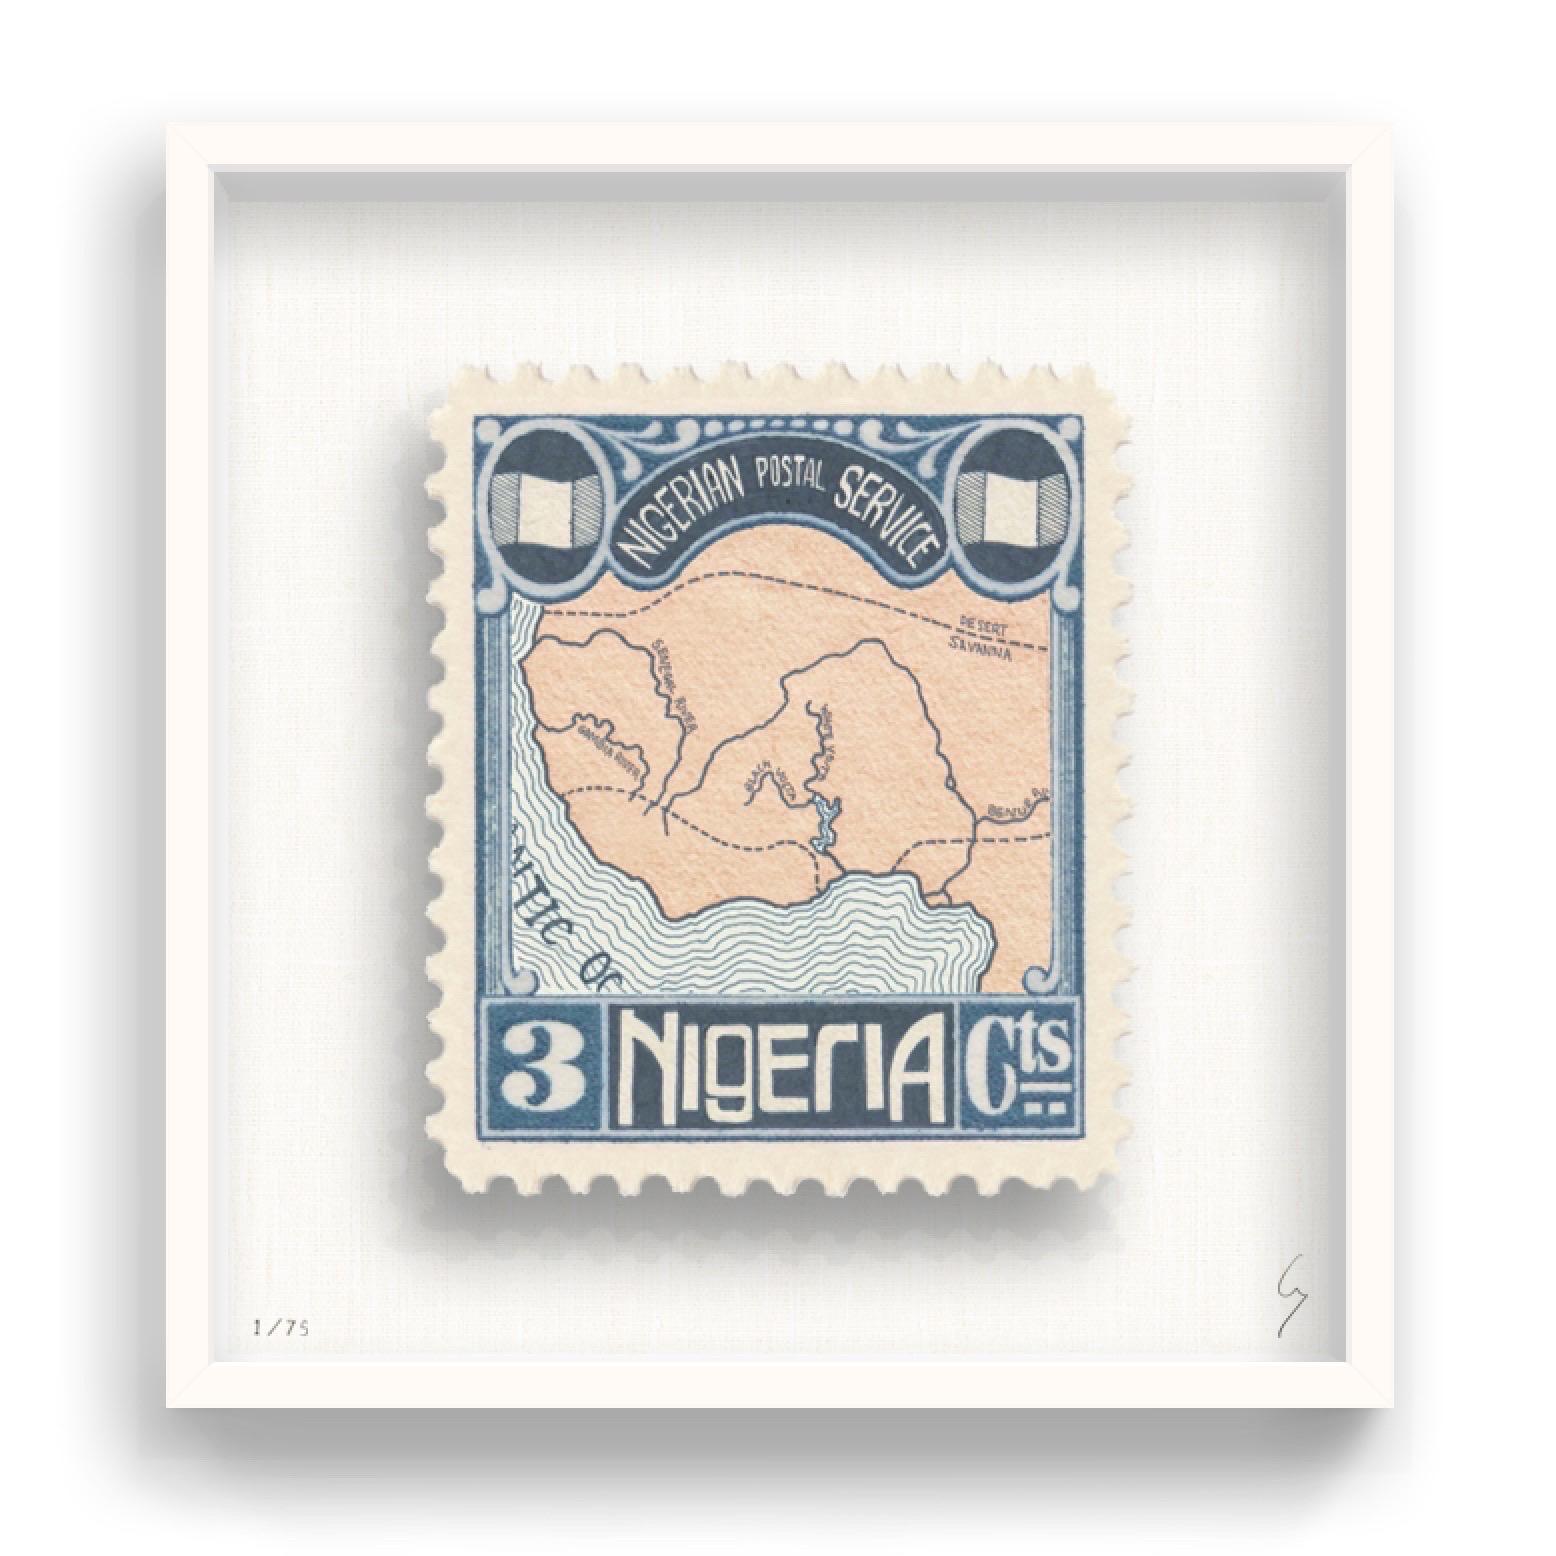 Guy Gee, Nigeria (medium)

Hand-engraved print on 350gsm on G.F Smith card
31 x 35 cm (12 1/5 x 13 4/5)
Frame included 
Edition of 75 

Each artwork by Guy had been digitally reimagined from an original postage stamp. Cut out and finished by hand,